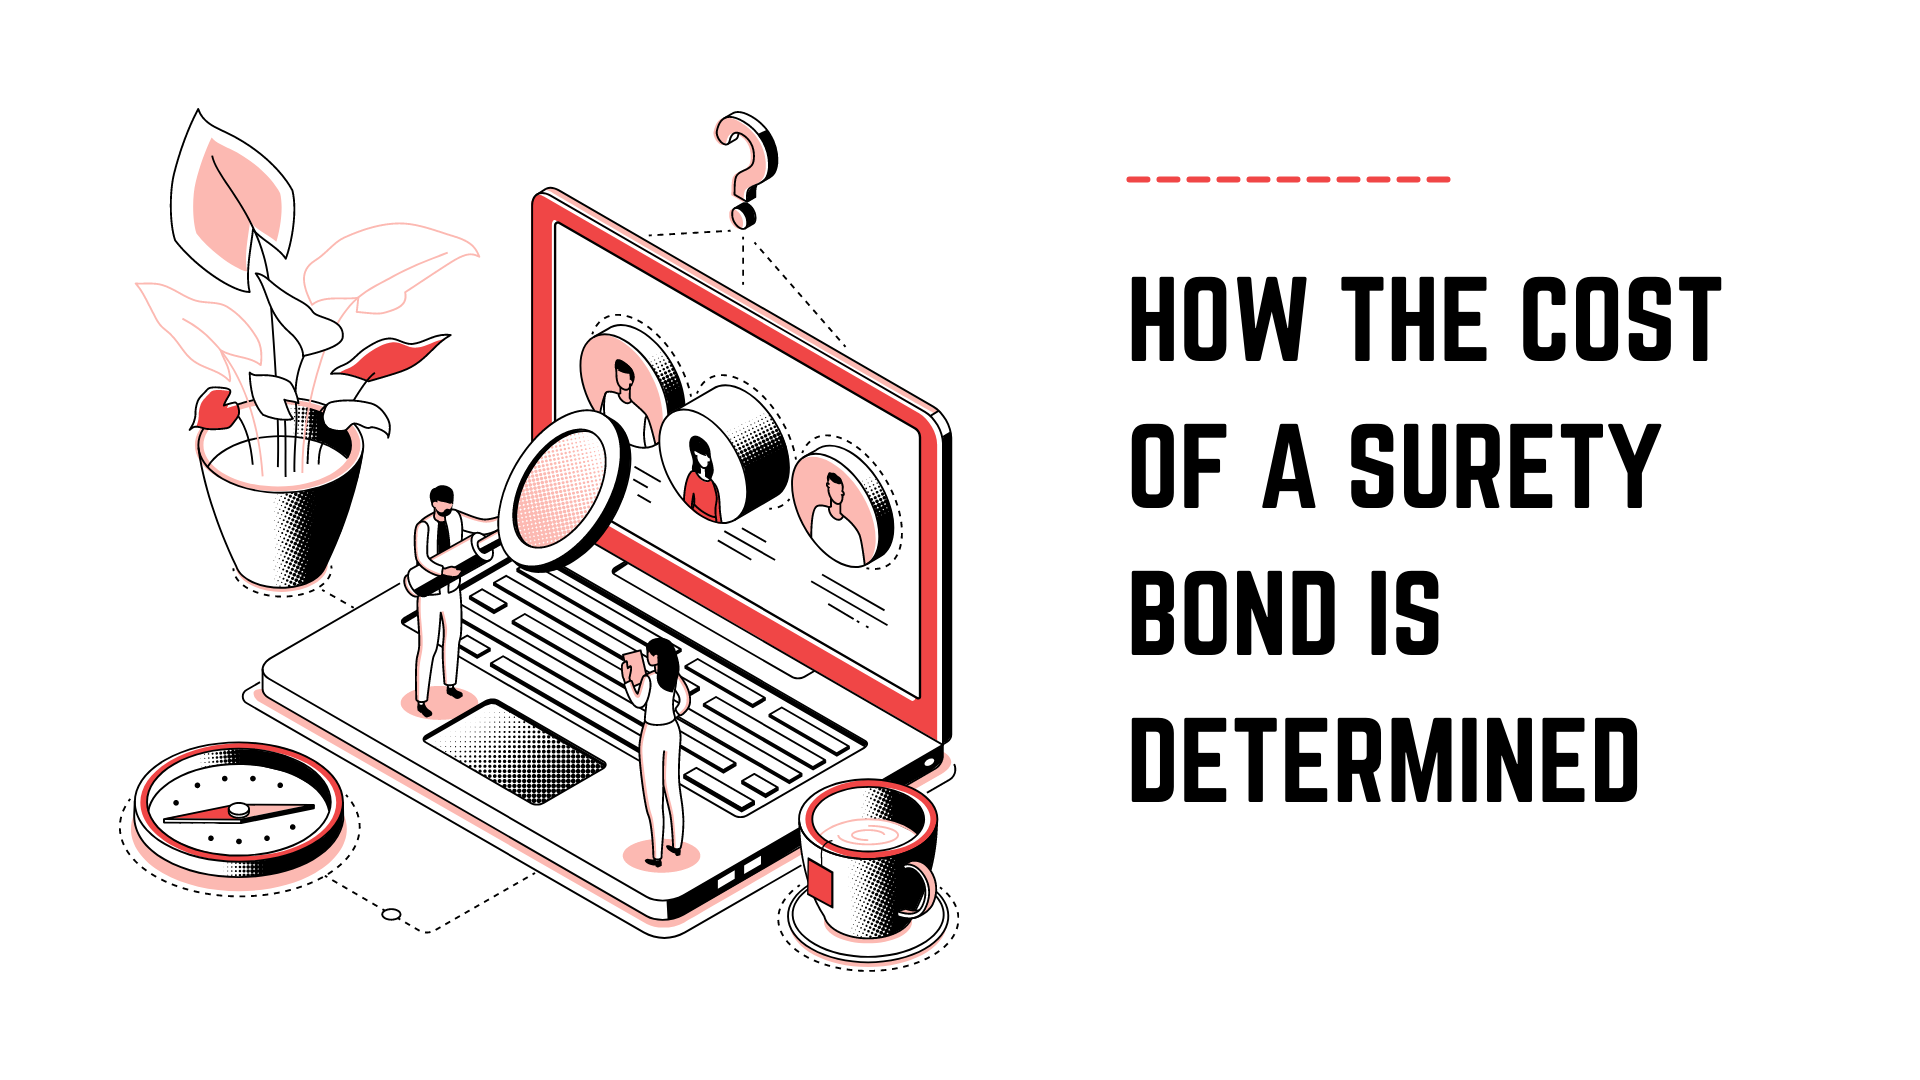 surety bond - How much does a surety bond cost - business concept